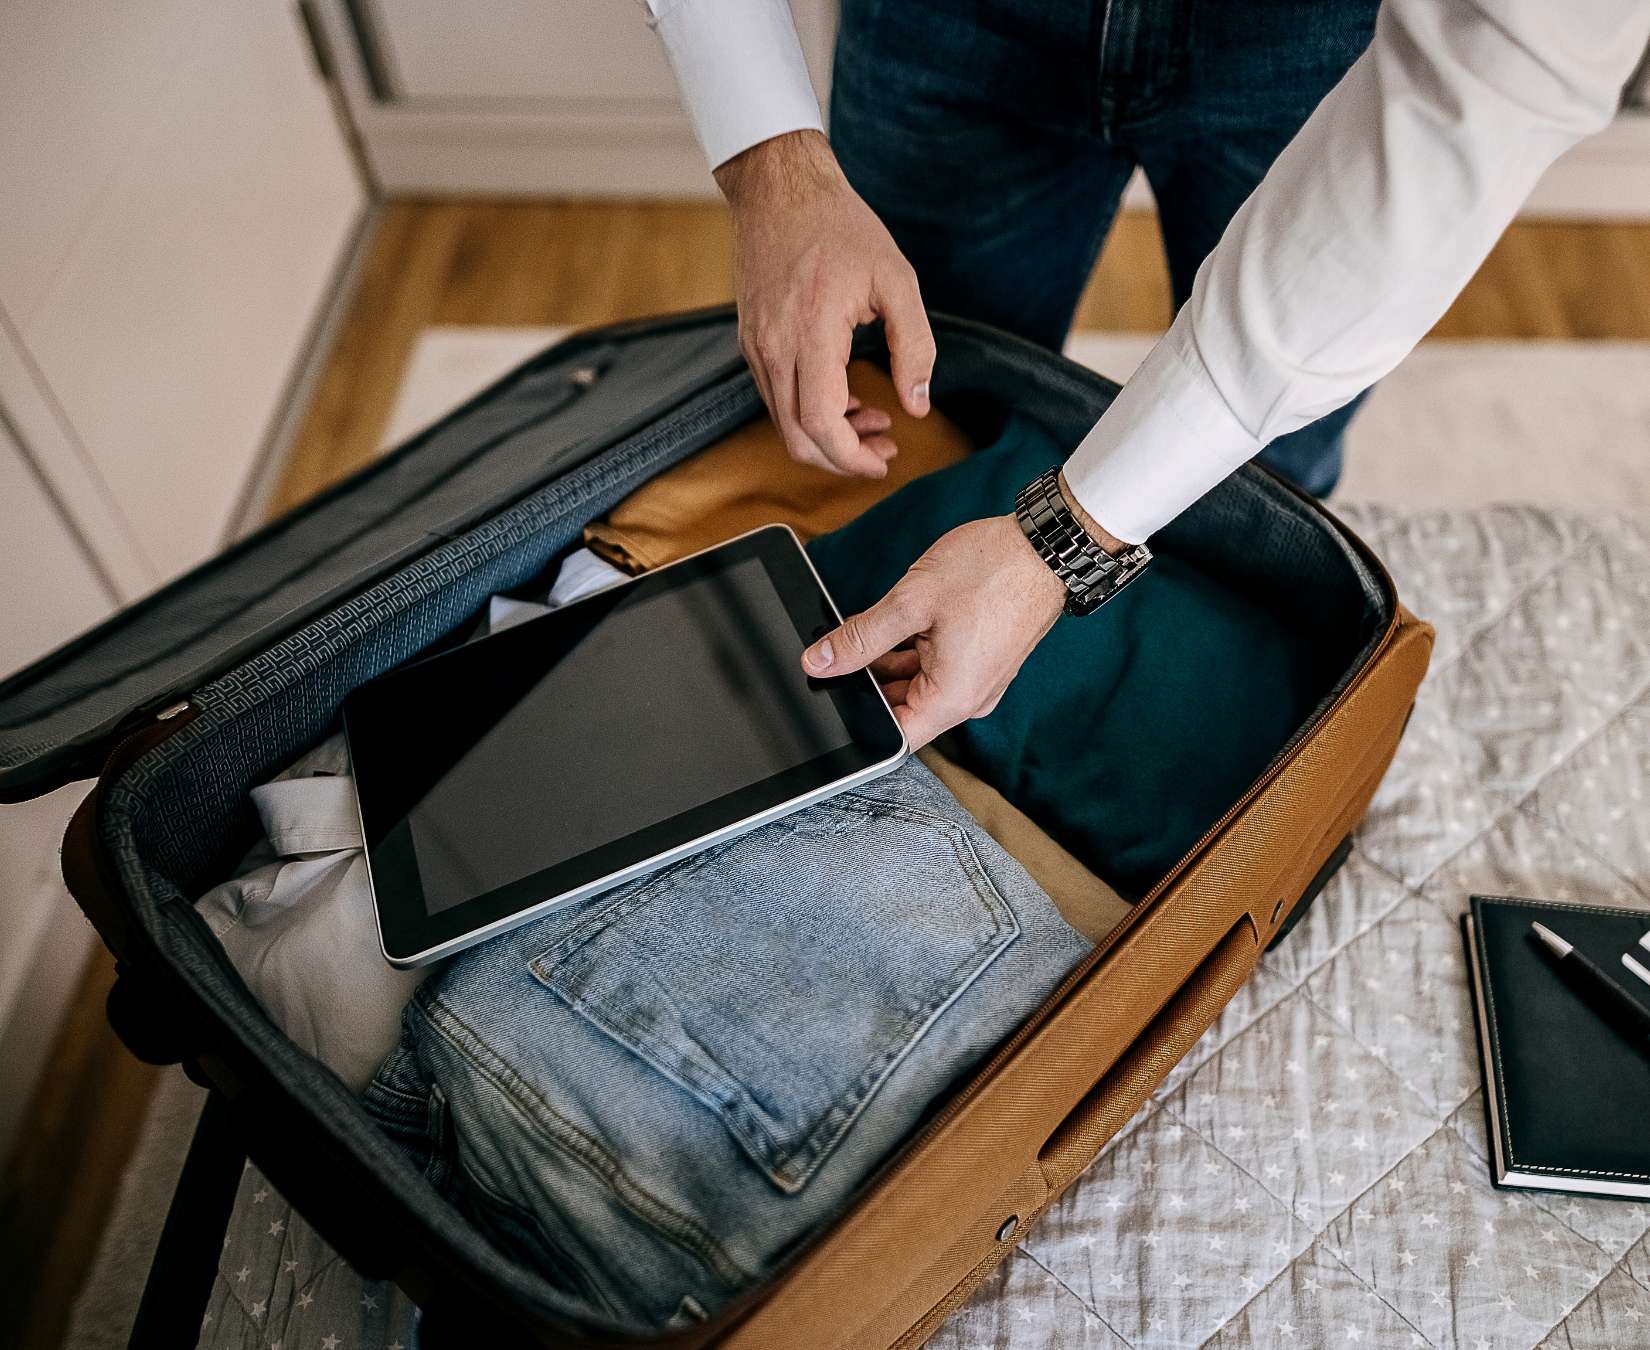 A business man packs a suitcase